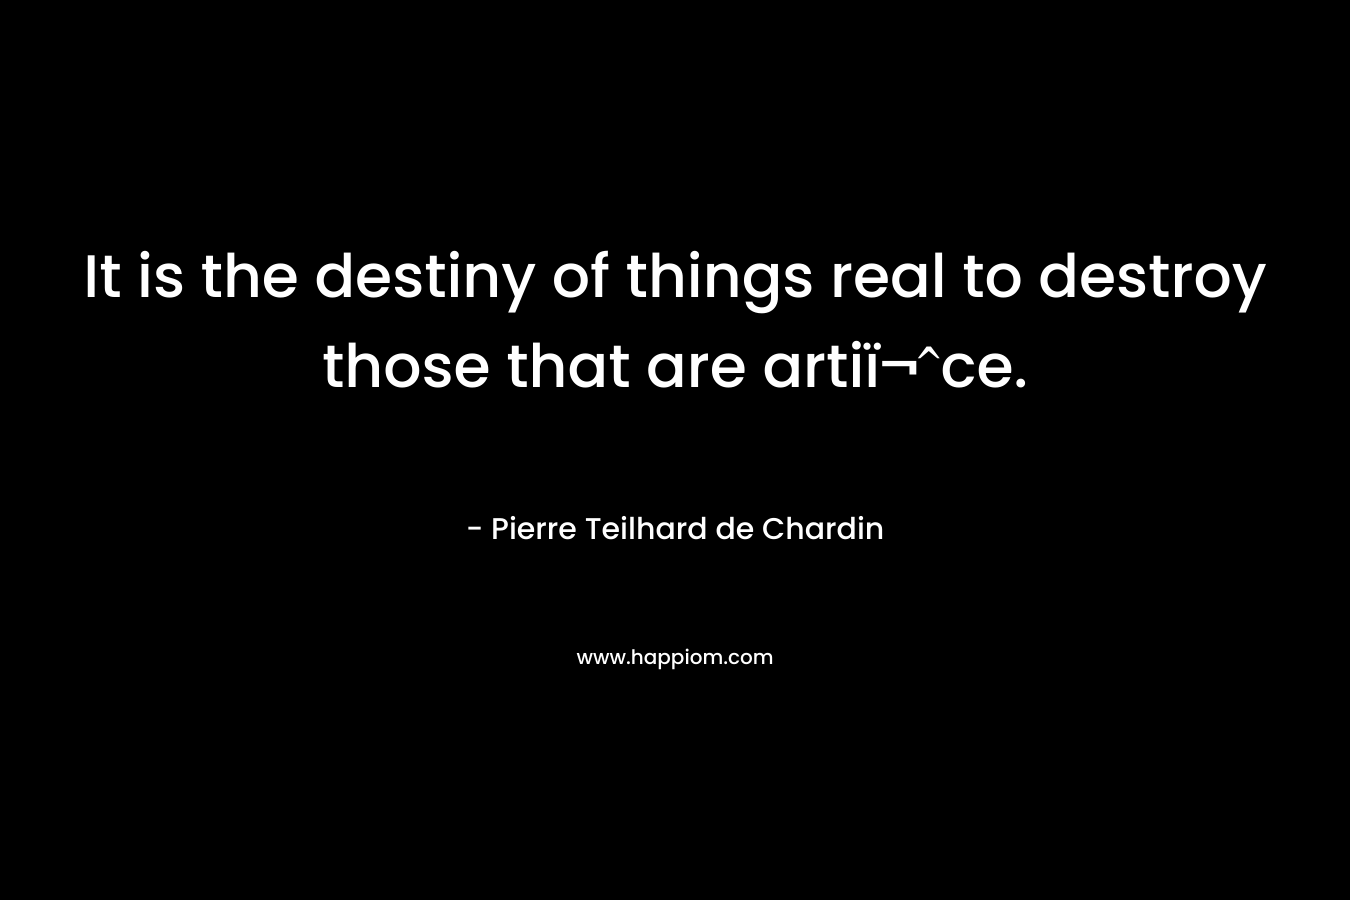 It is the destiny of things real to destroy those that are artiï¬ce. – Pierre Teilhard de Chardin